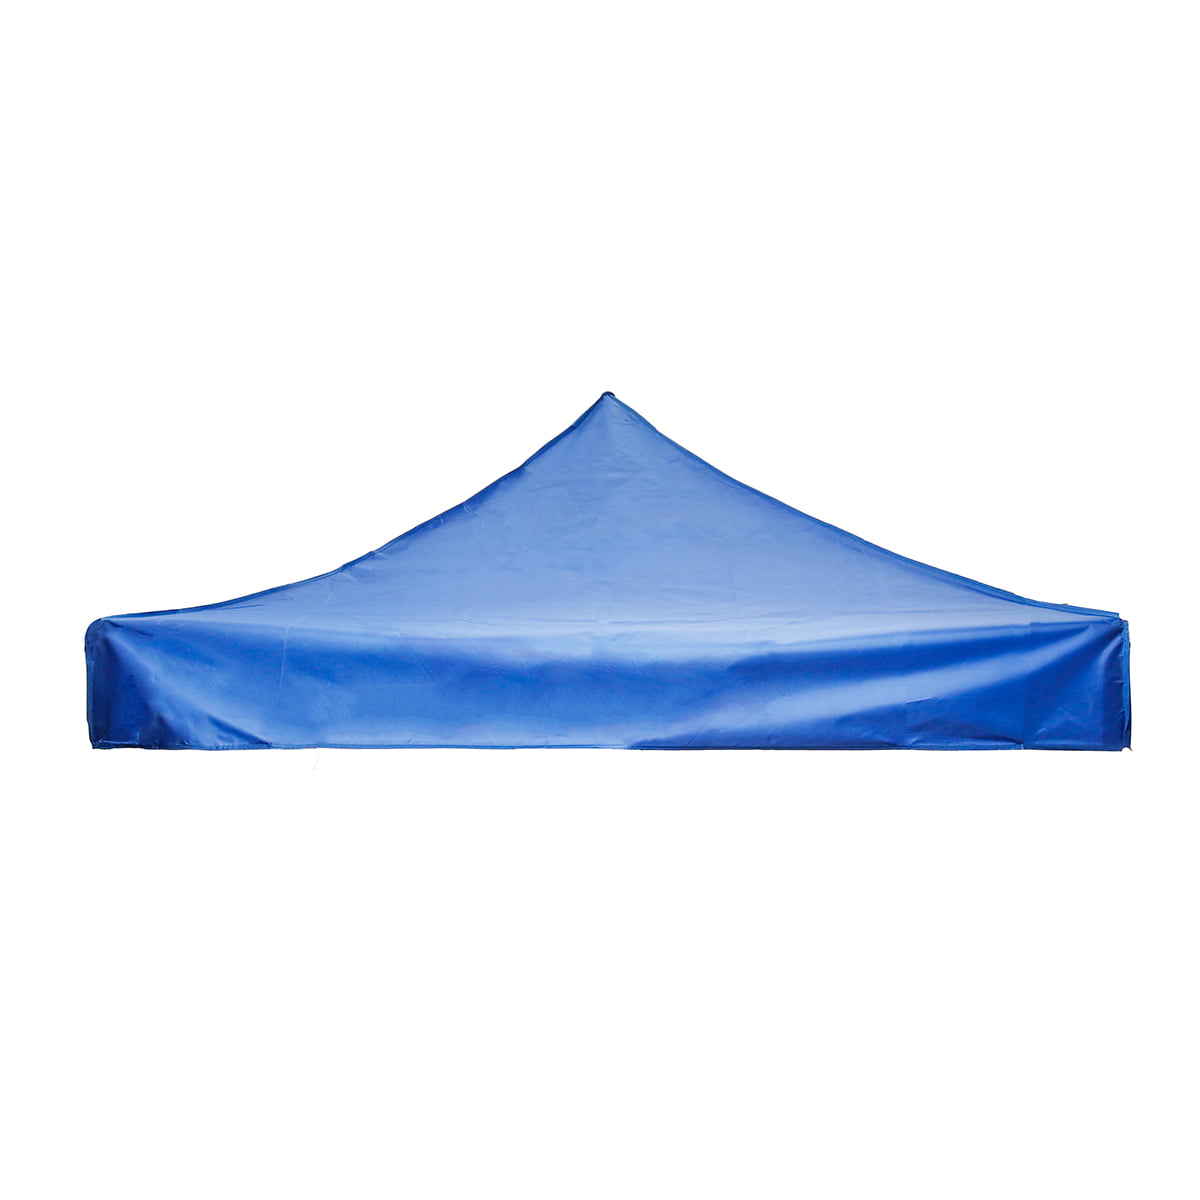 Outdoor Waterproof Canopy UV Protection Sun Tent Roof Top Spare Part for Garden Patio 3x3m Gazebo Top Cover Roof Replacement Creamy-White